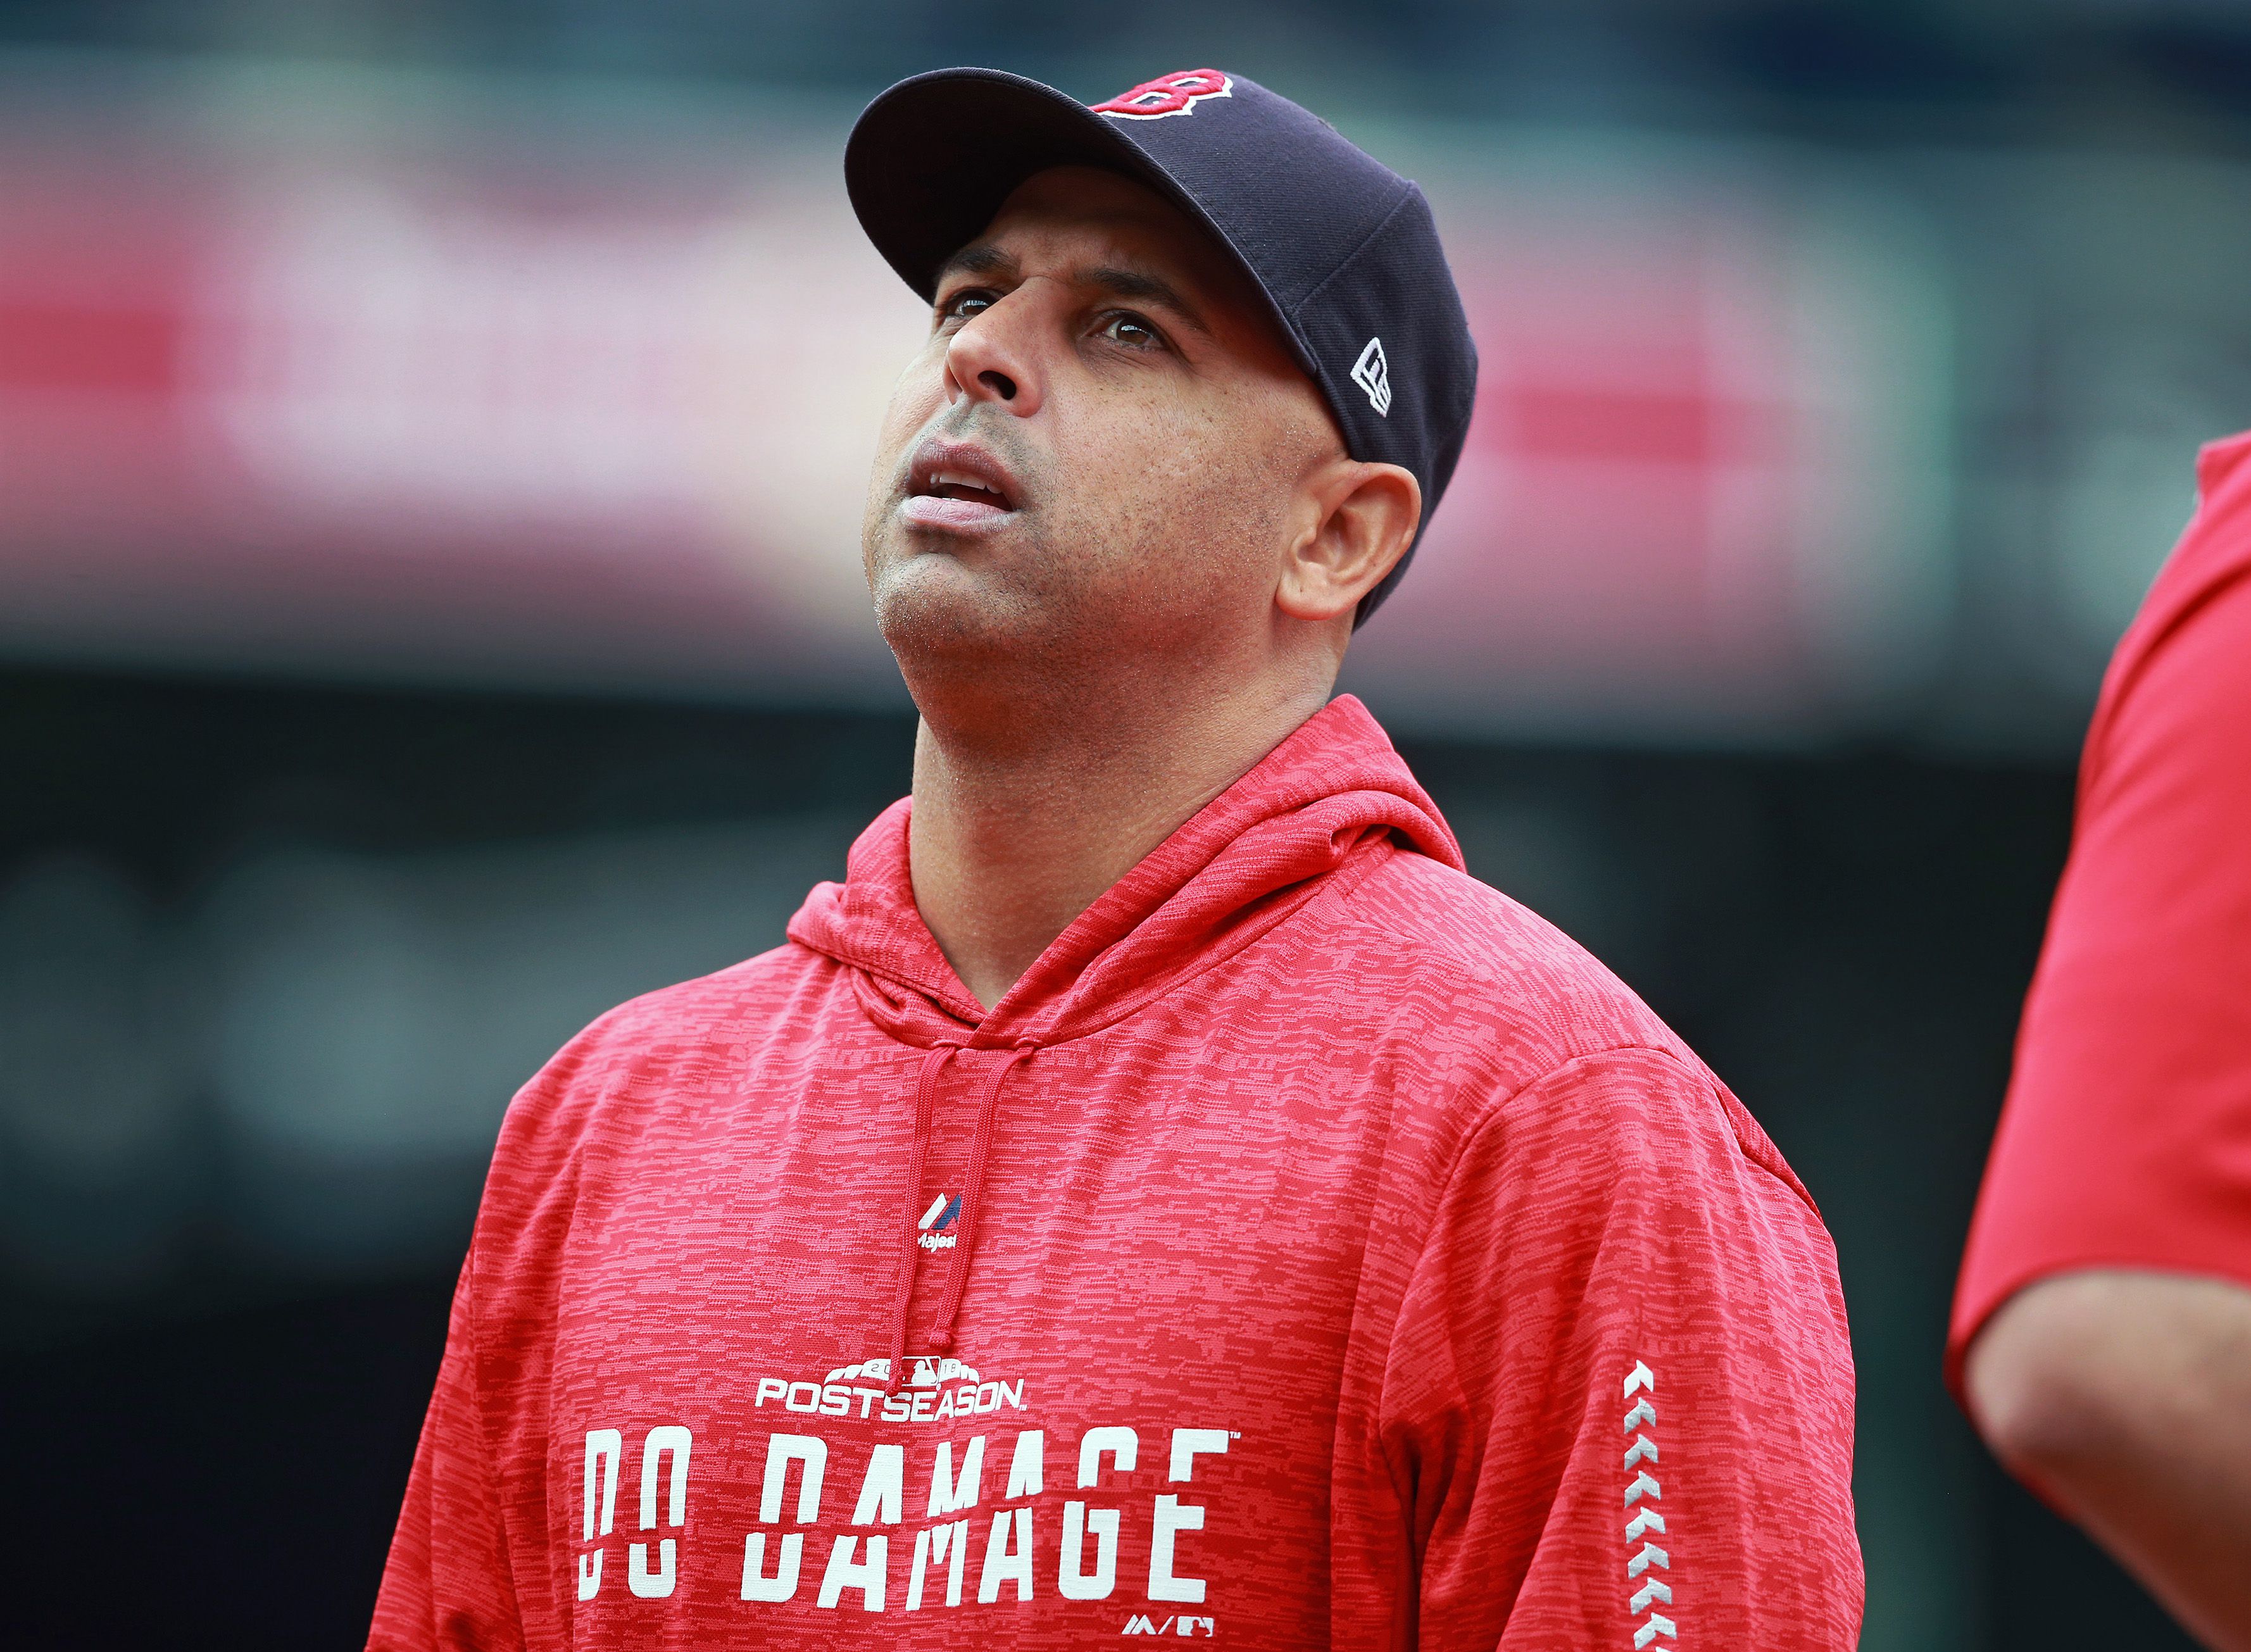 Alex Cora is getting his second chance, but what about baseball's other  cheaters? - The Boston Globe